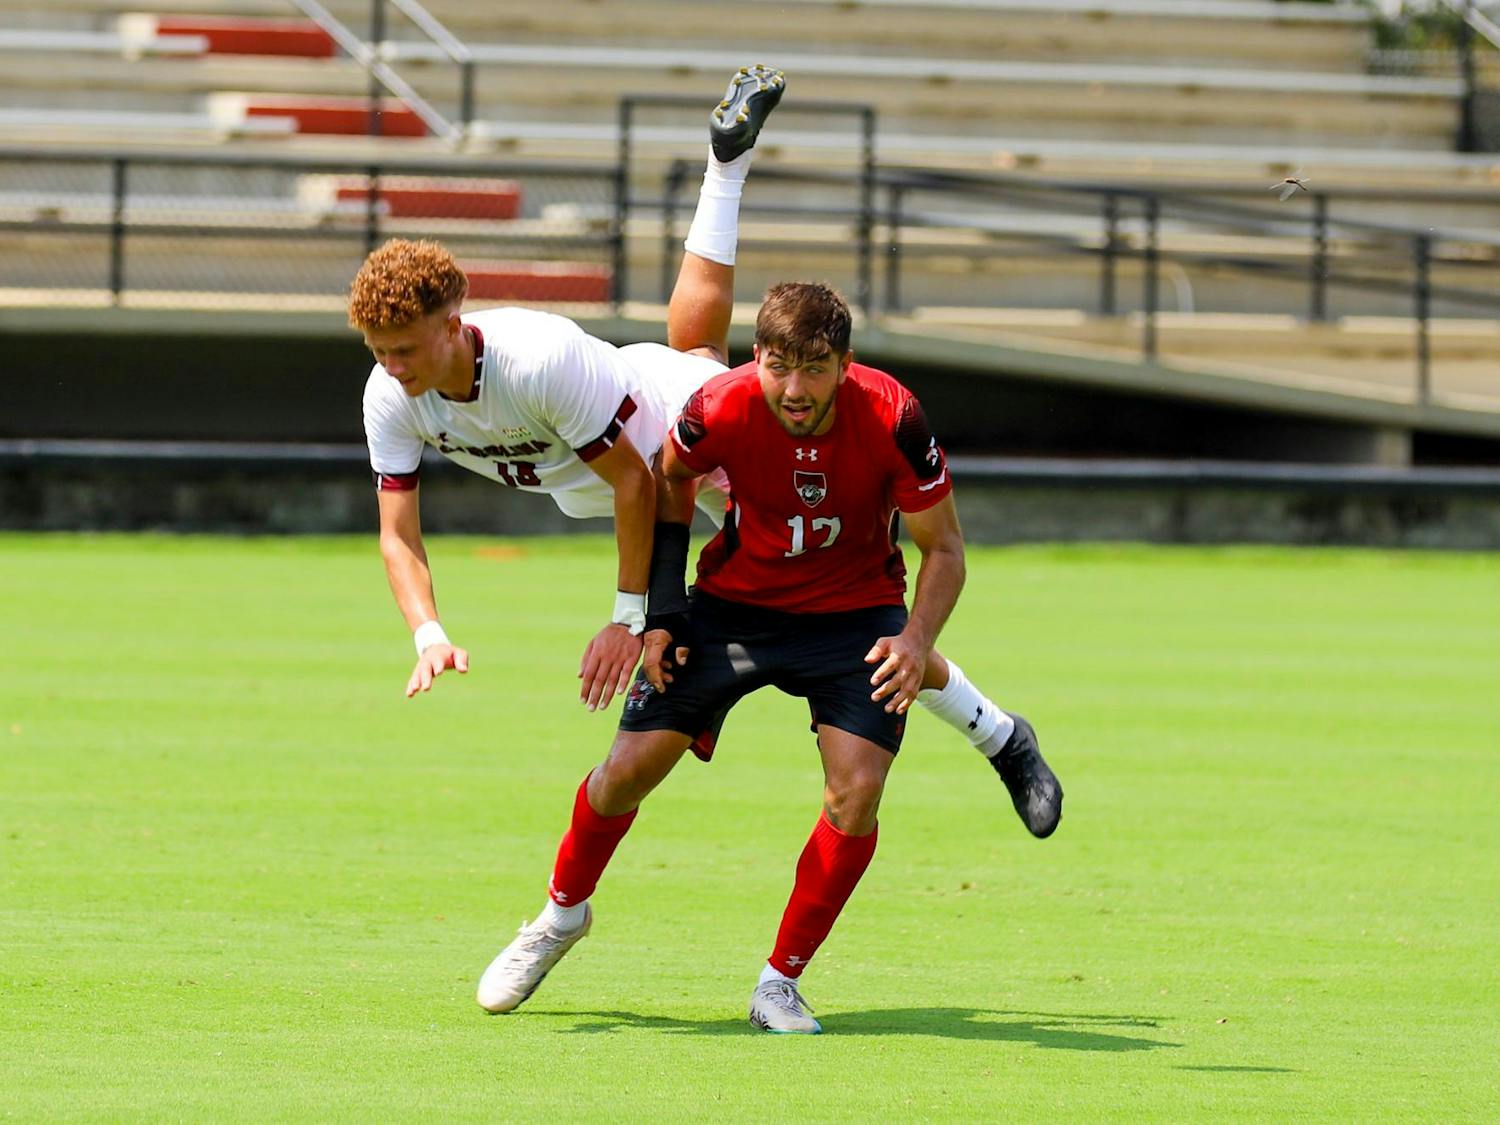 Freshman midfielder Jonah Biggar tumbles over a Gardner-Webb player after a sudden stop. Over the whole match, the Bulldogs totaled 15 fouls to the Gamecocks' 10.